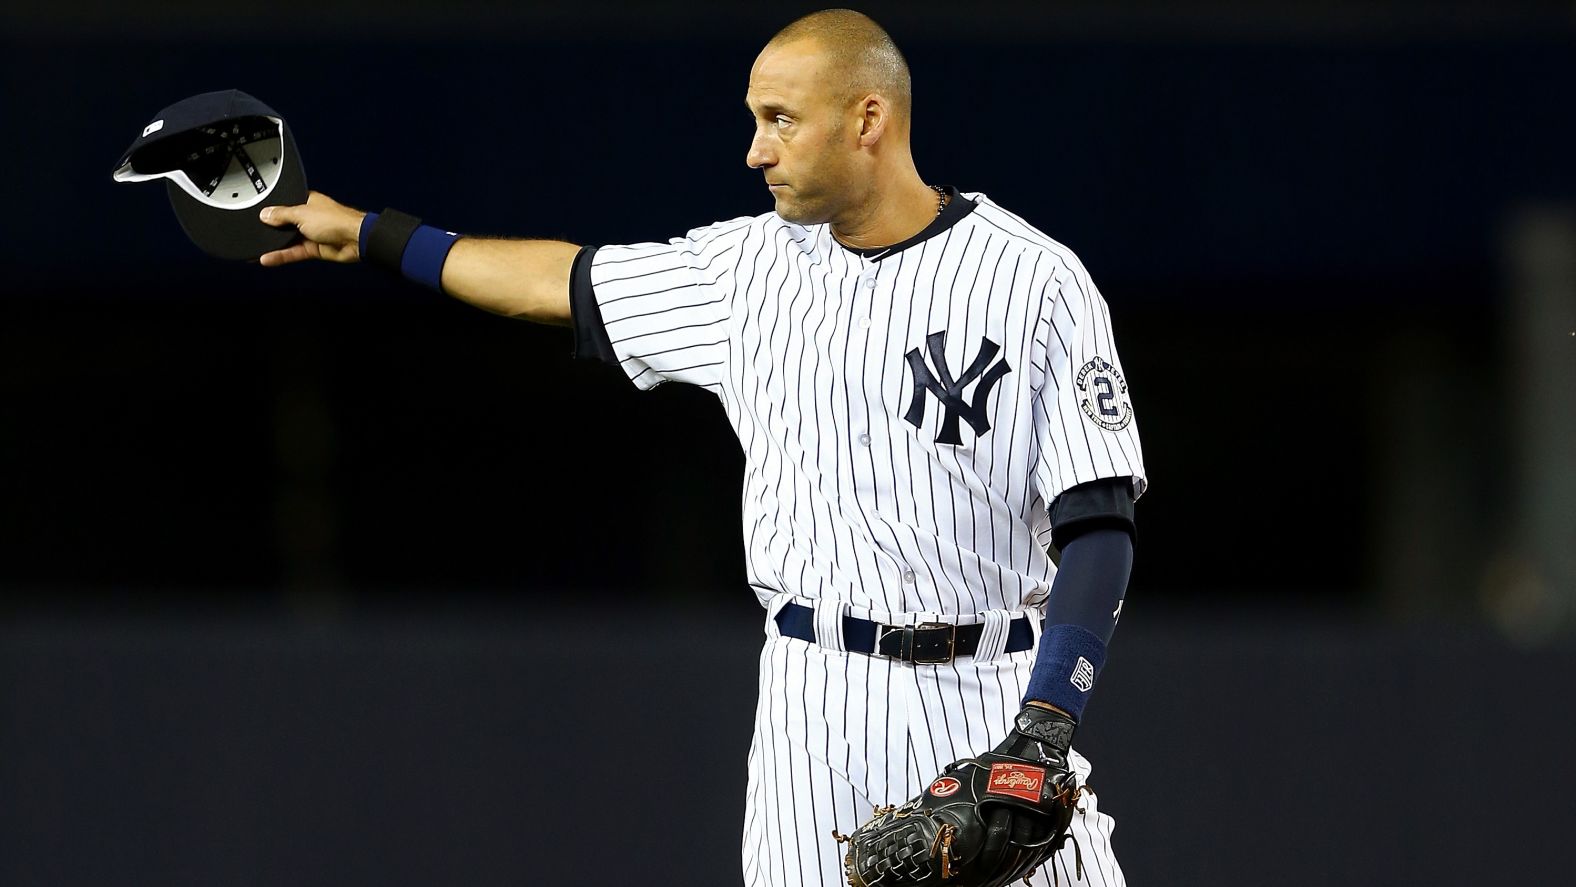 Jeter gestures to the fans during his last game at Yankee Stadium.